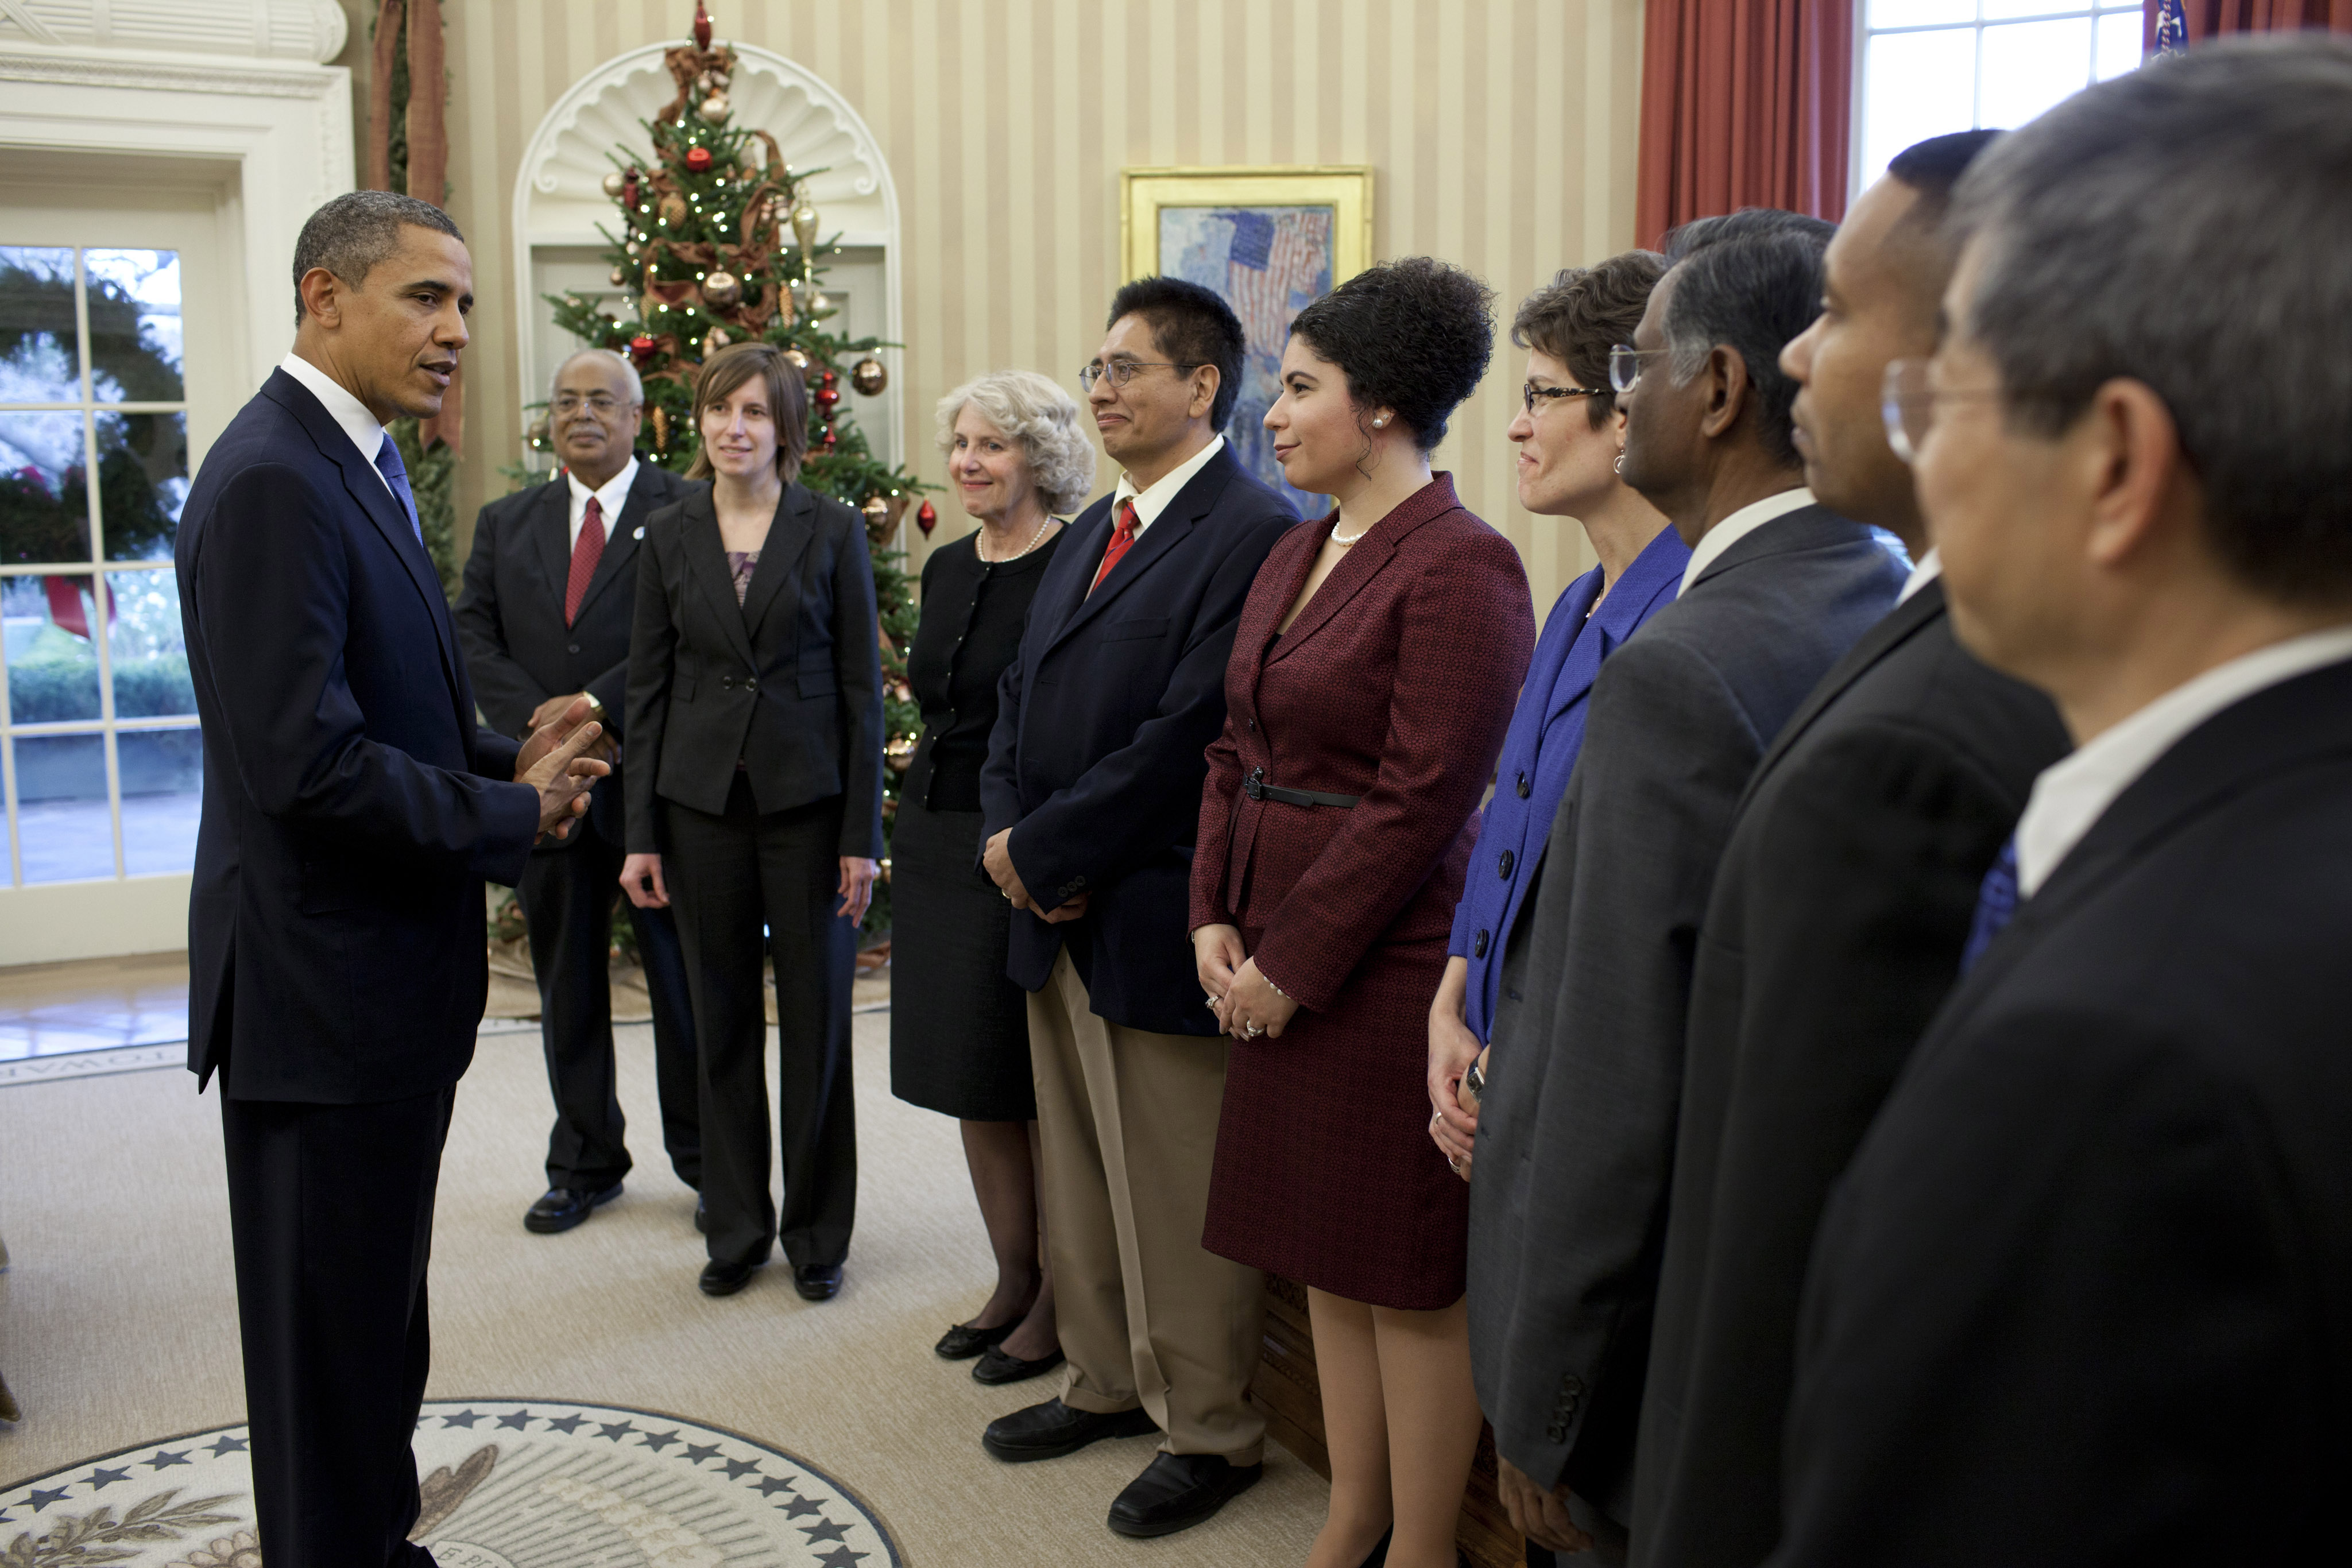 President Obama meets with 2011 PAESMEM recipients